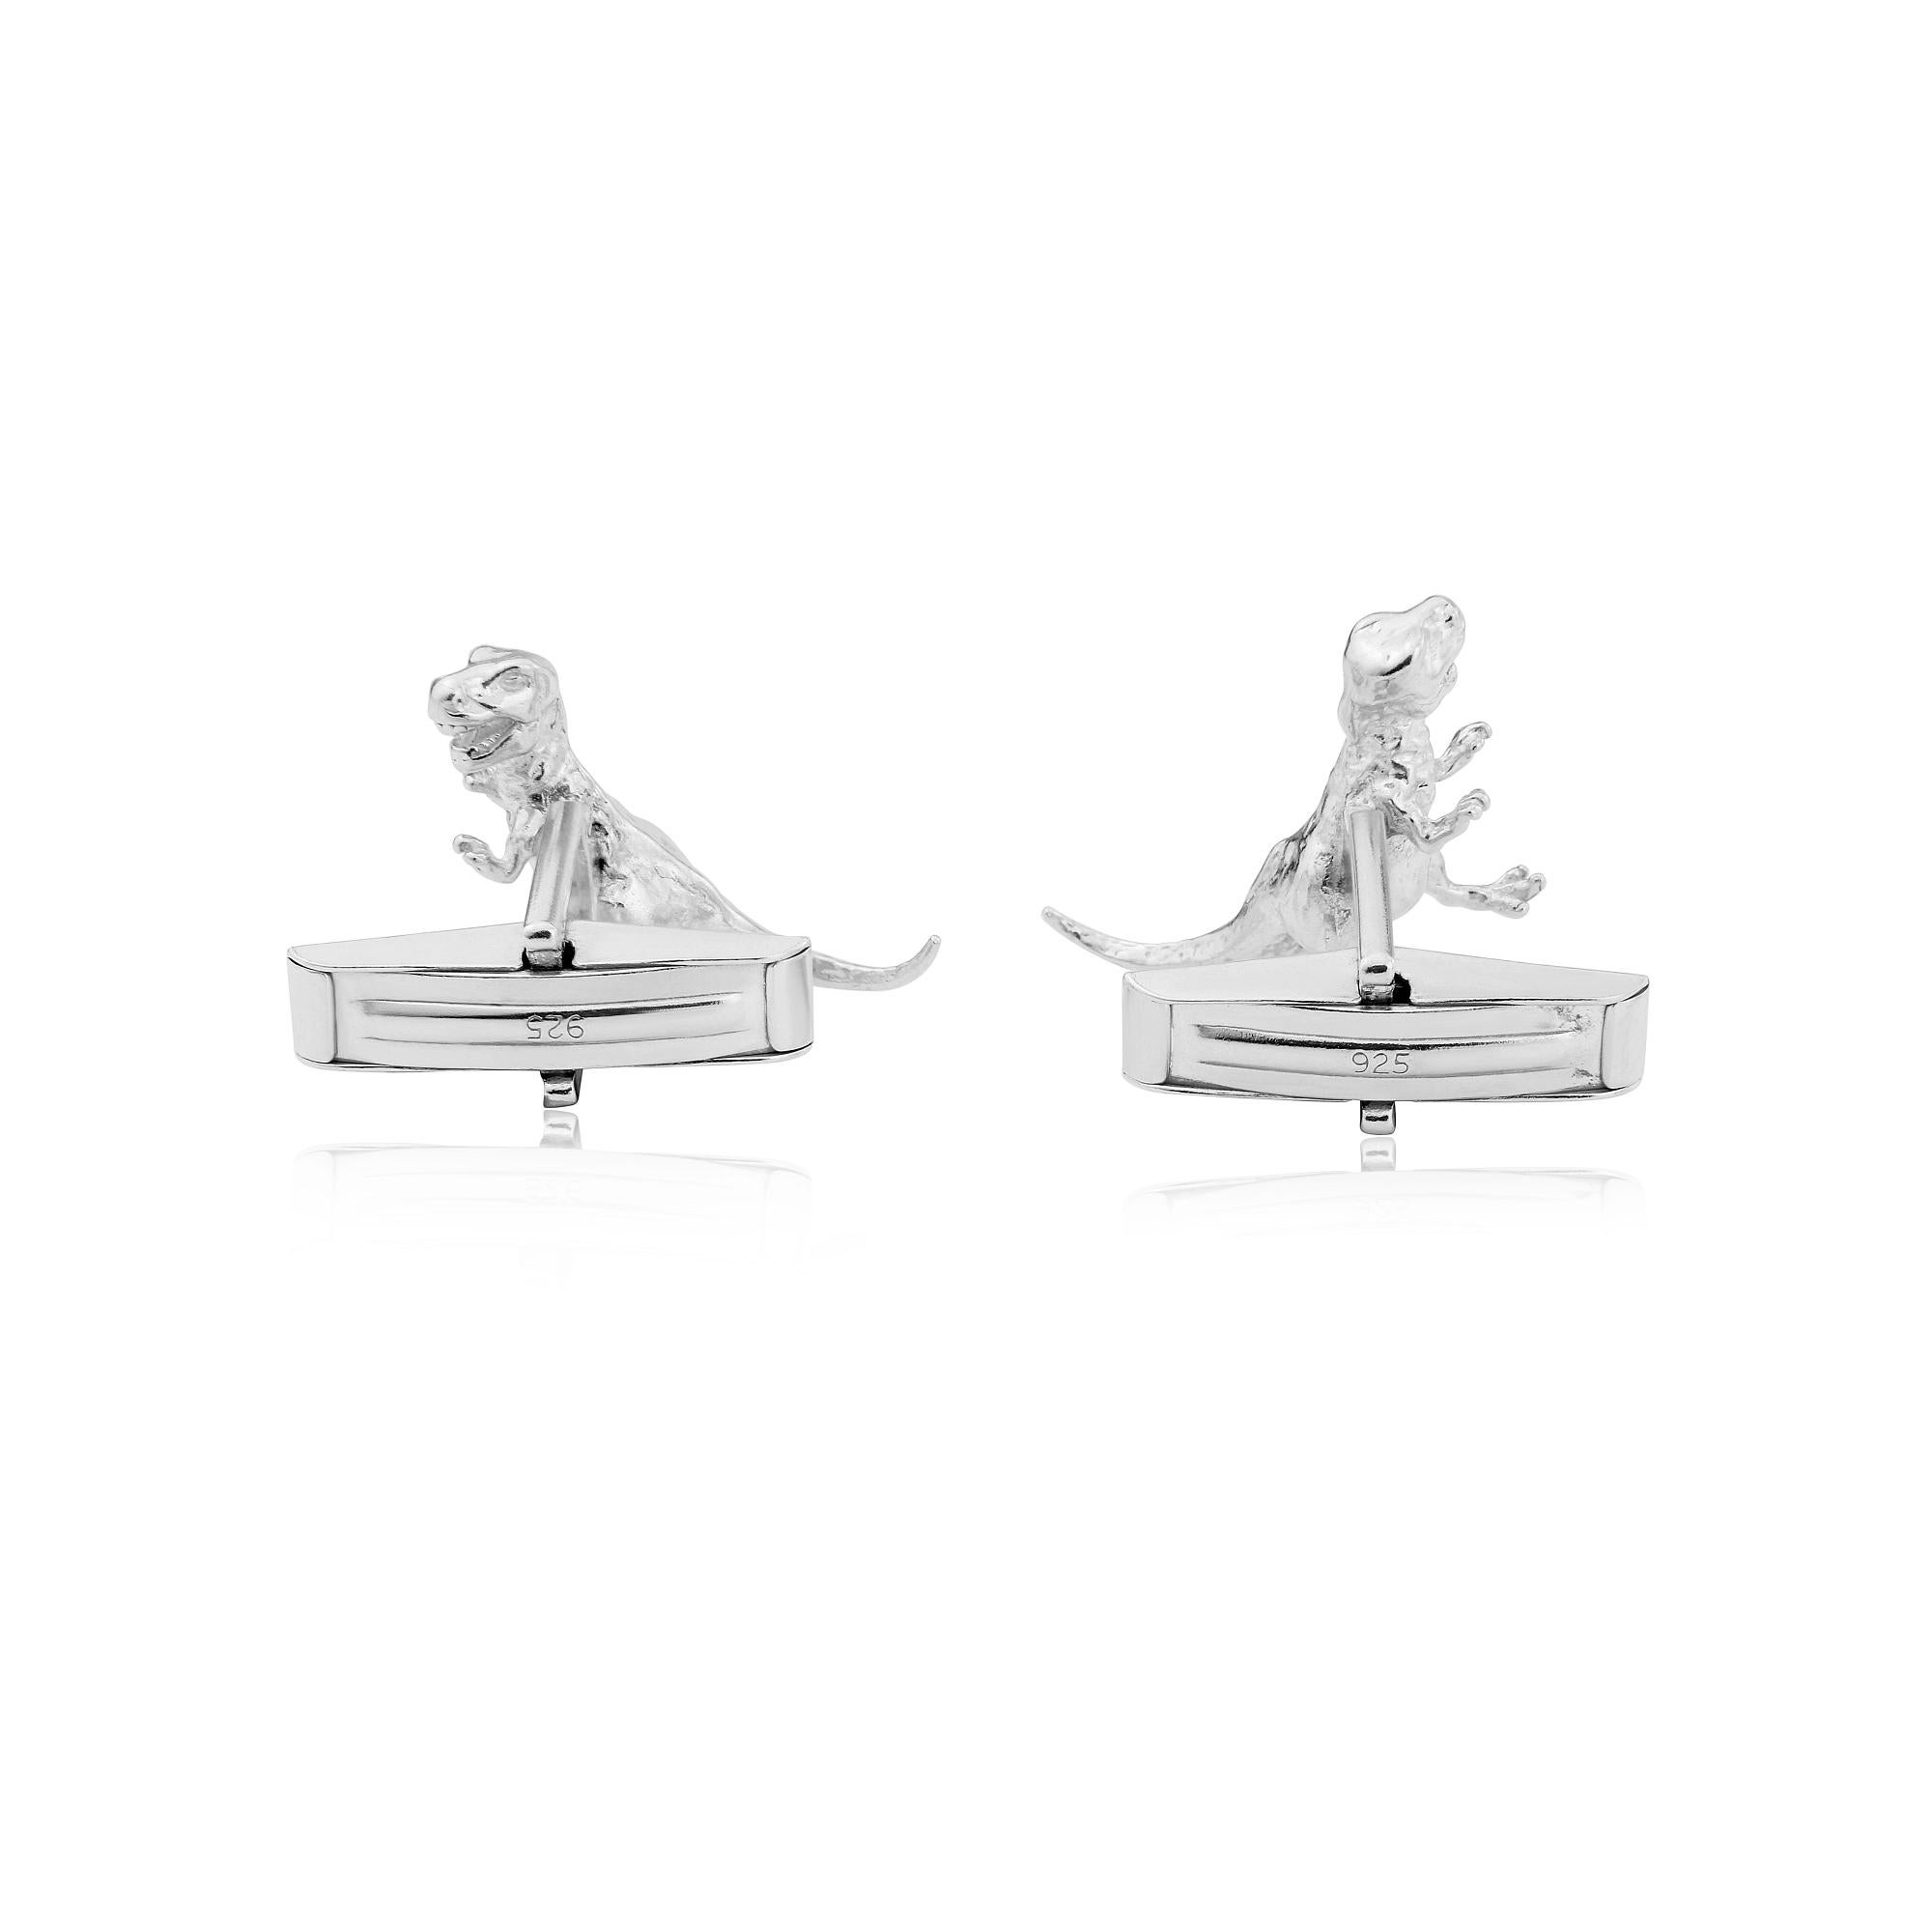 Contemporary T Rex Dinosaur Cufflinks in Sterling Silver For Sale